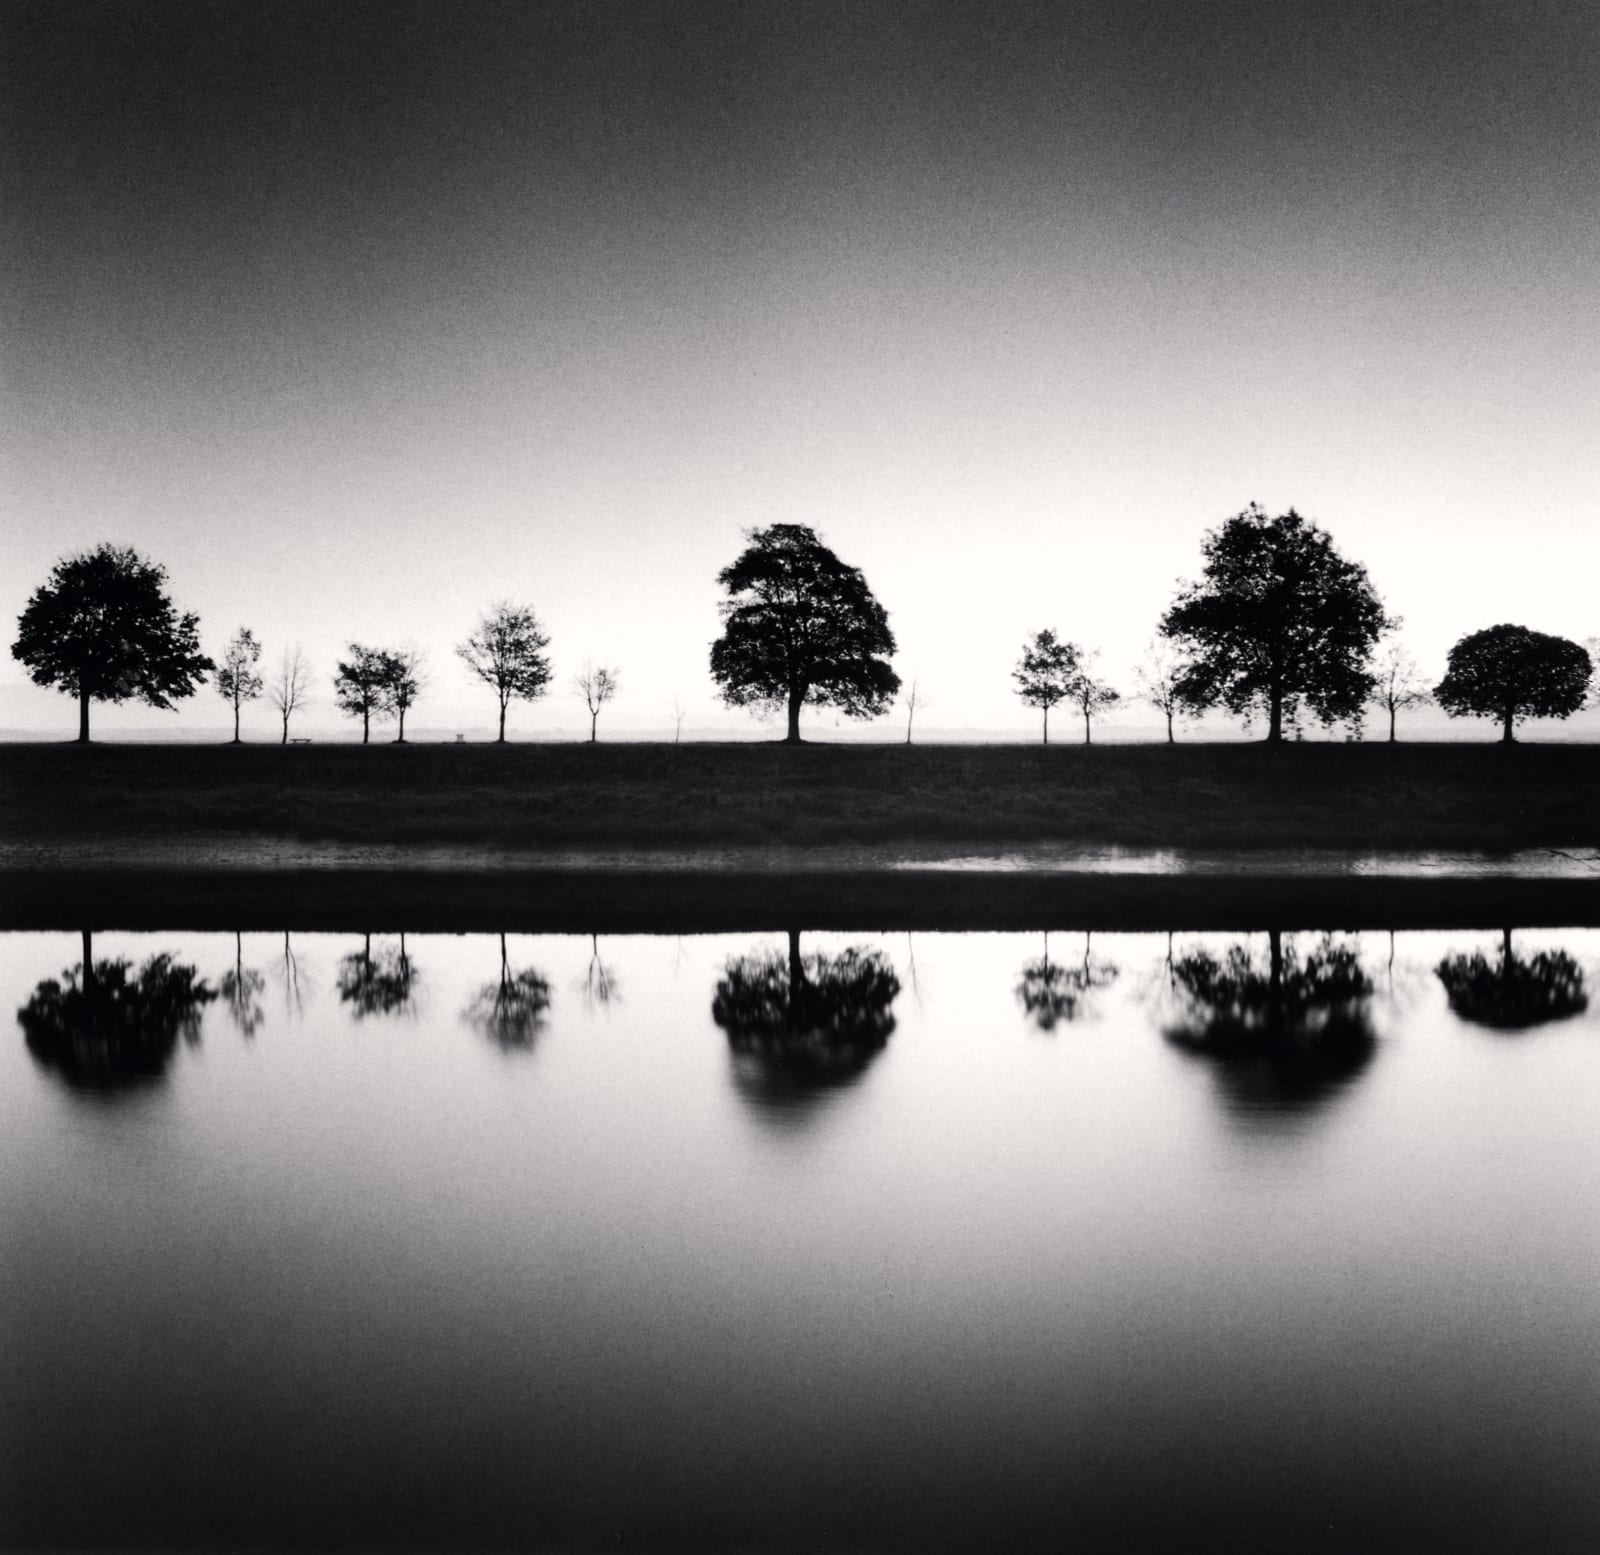 Michael Kenna, Reflecting Trees, Saint Valery sur Somme, France